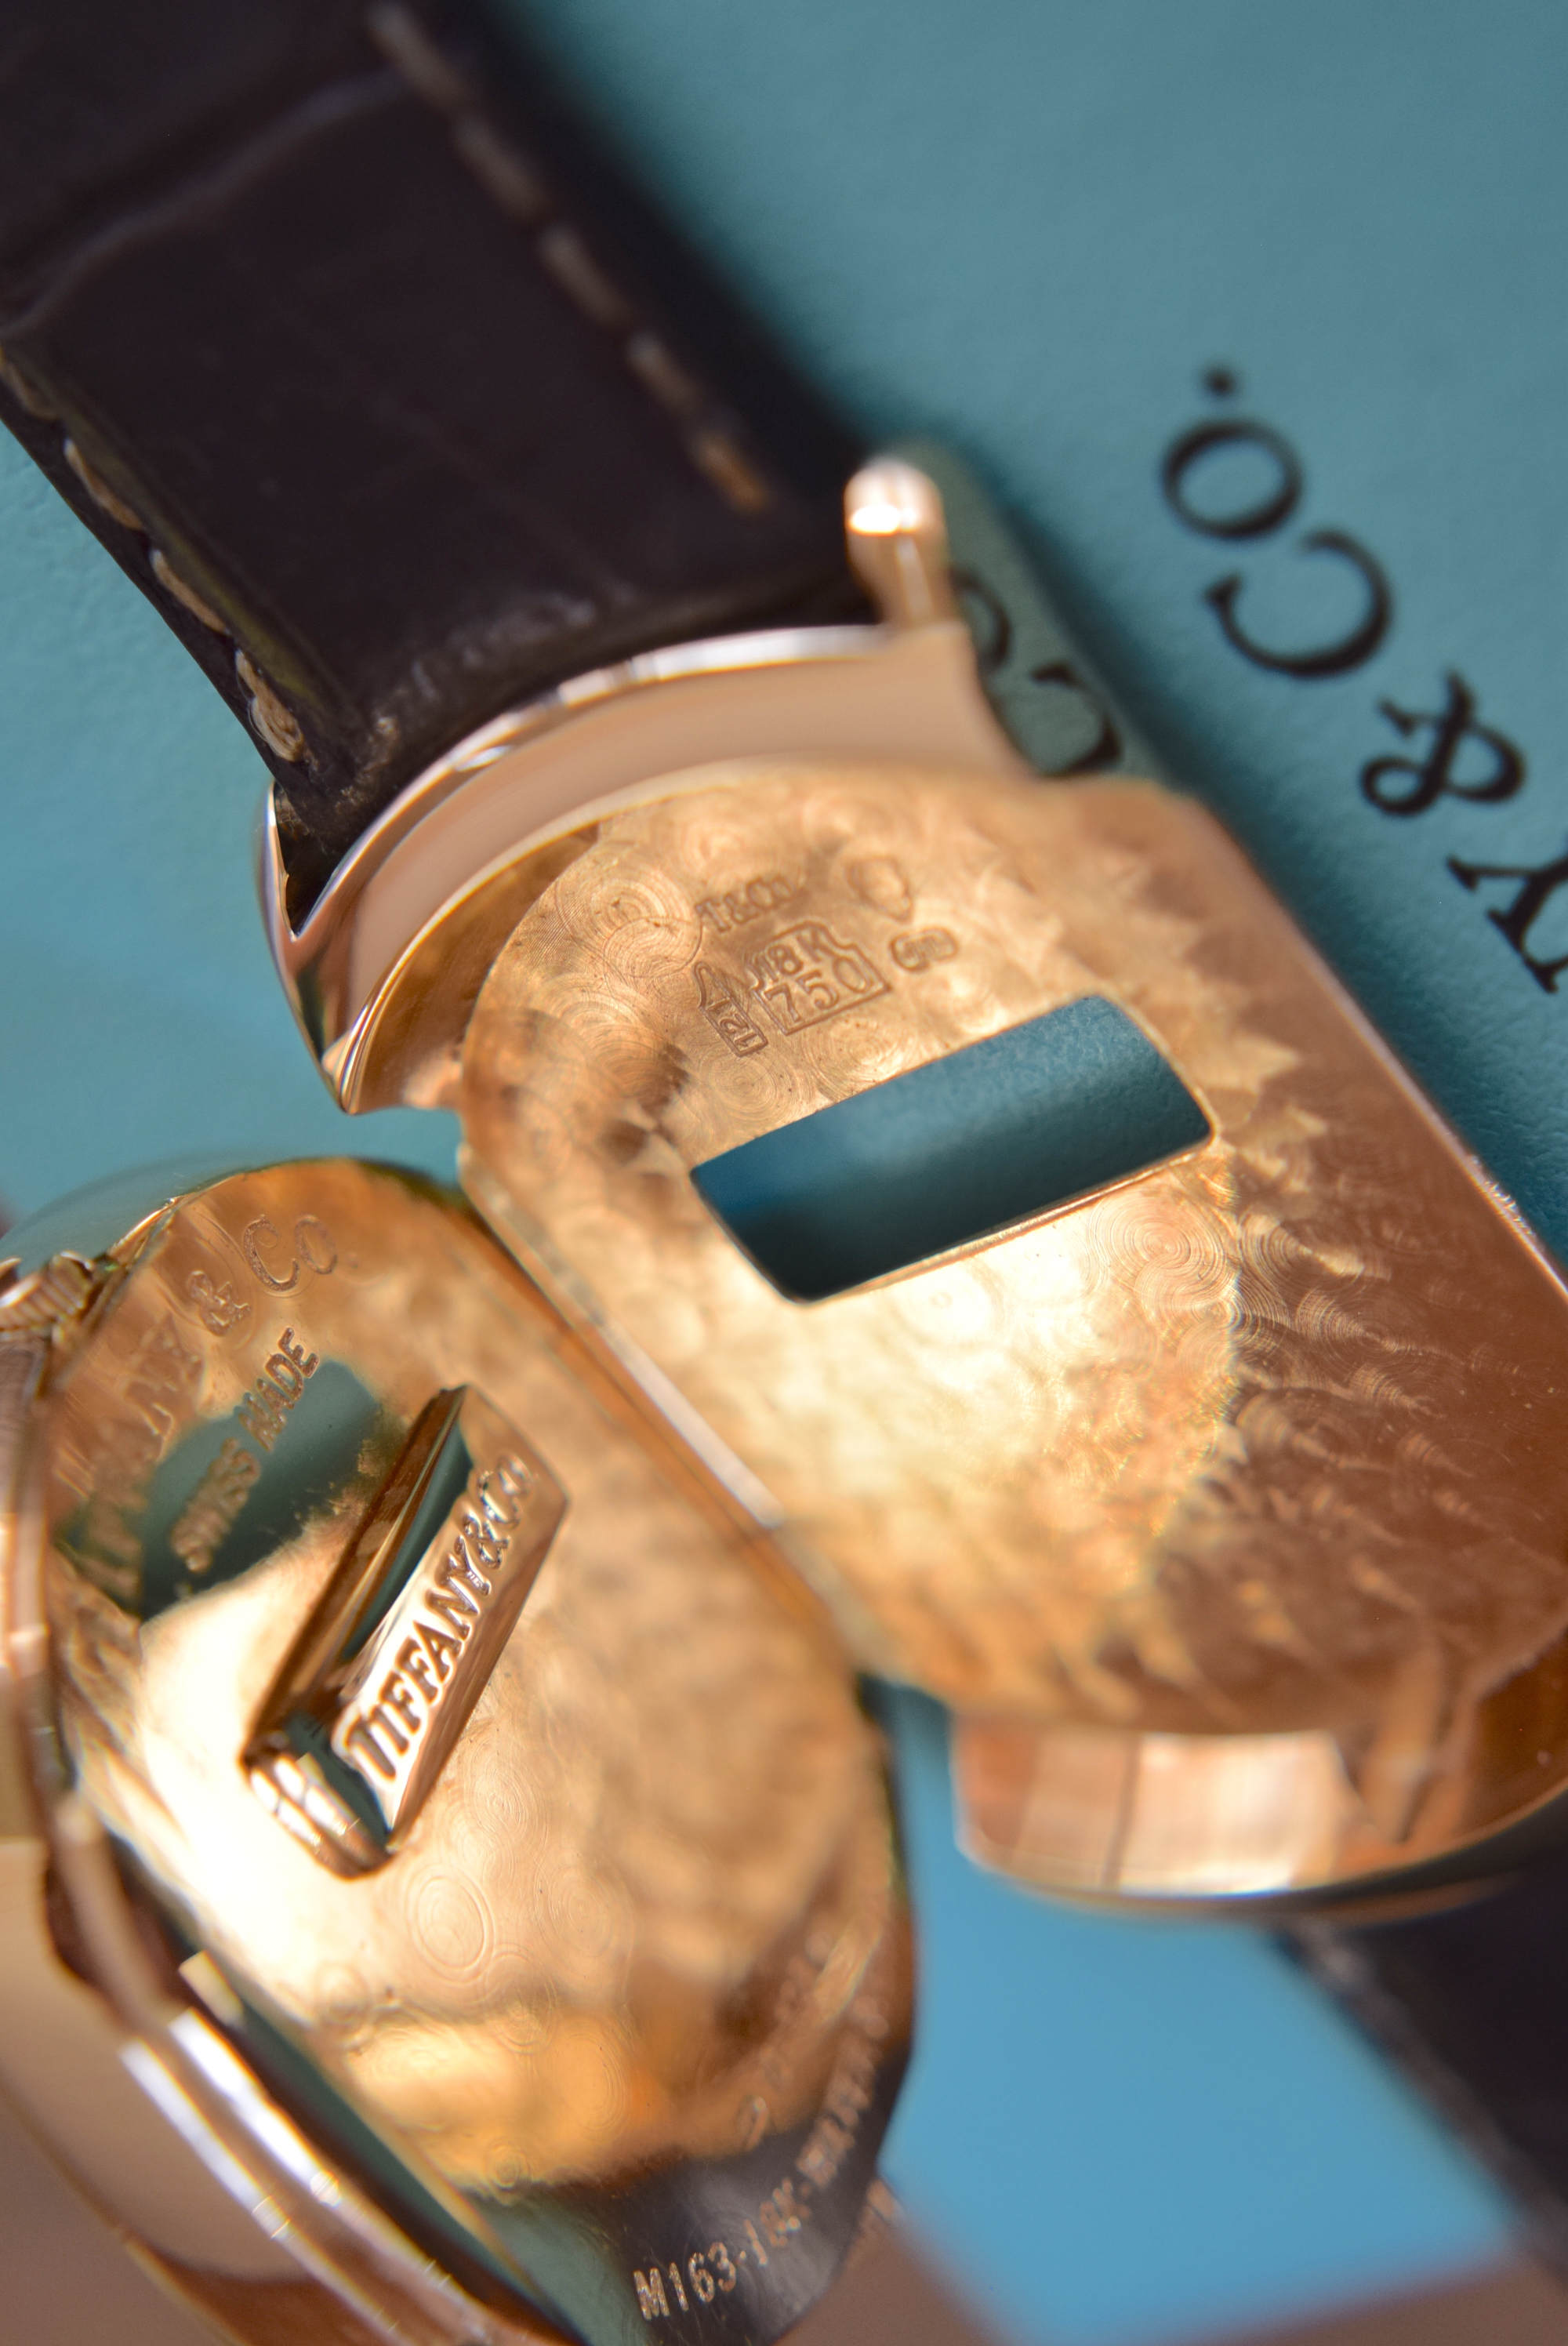 RARE 18K GOLD TIFFANY & CO. "TONNEAU" DUAL-TIME GENTS WRISTWATCH (WITH £9,000 VALUATION) - Image 10 of 10